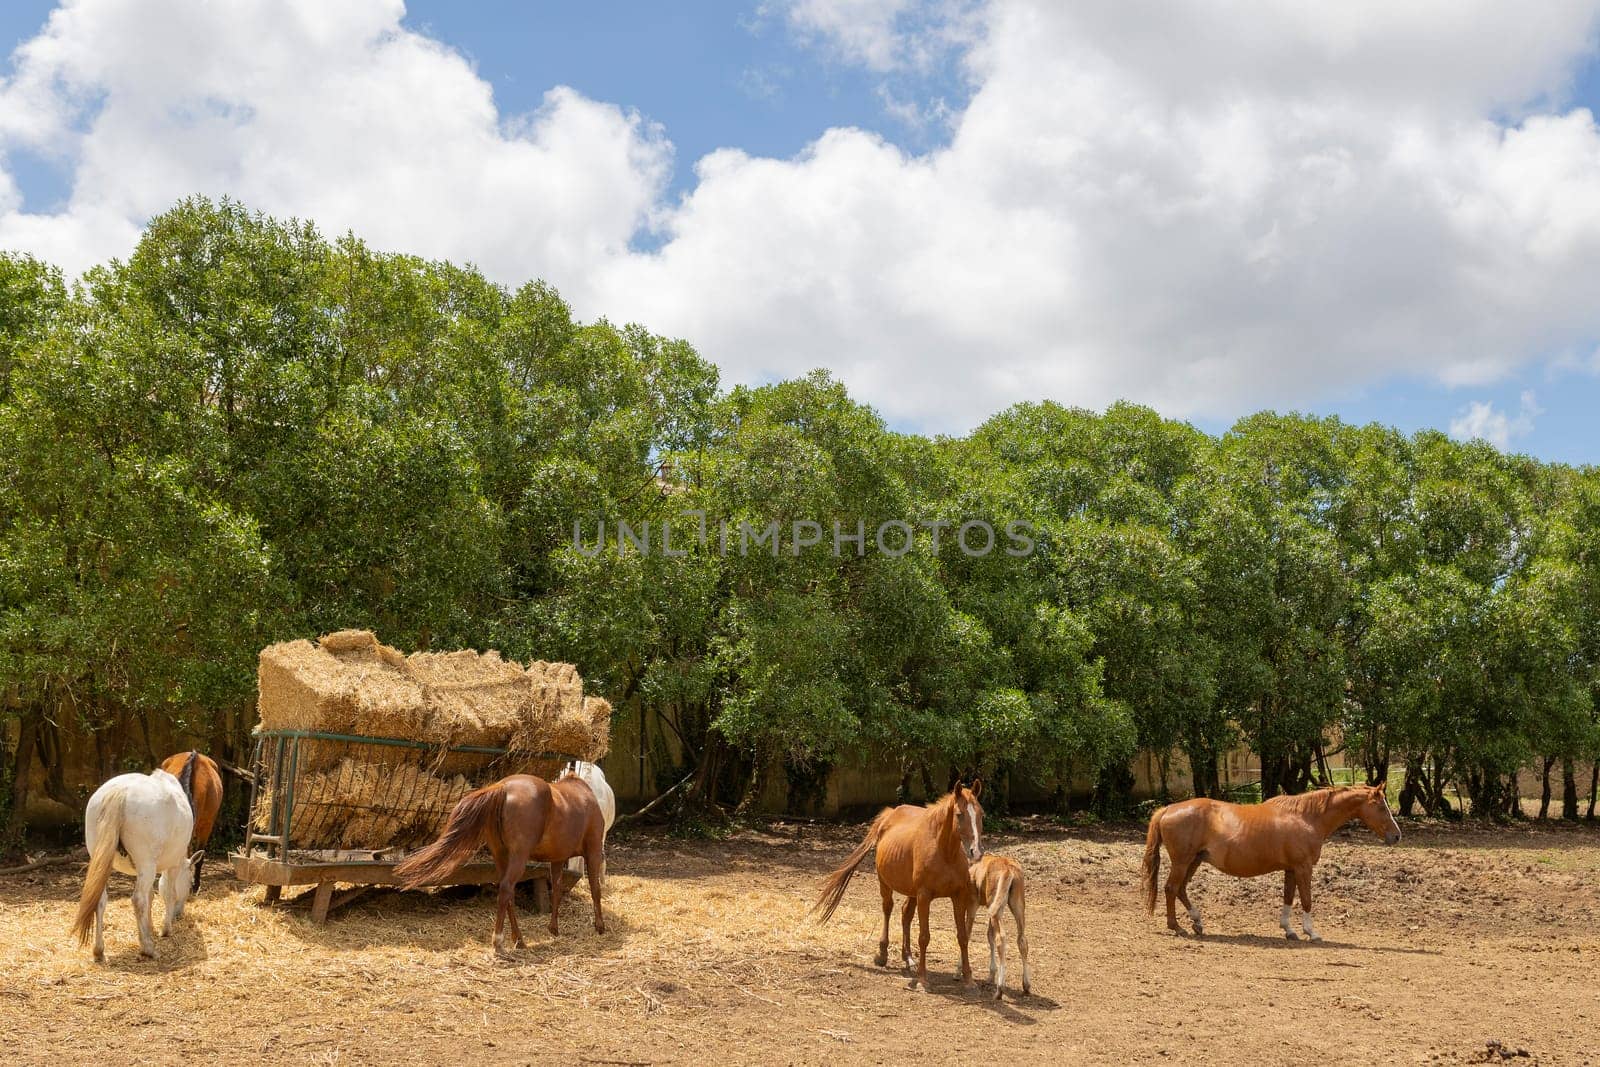 A group of horses are grazing in a field with a hay feeder in the background. The scene is peaceful and calm, with the horses enjoying their meal and the surrounding greenery